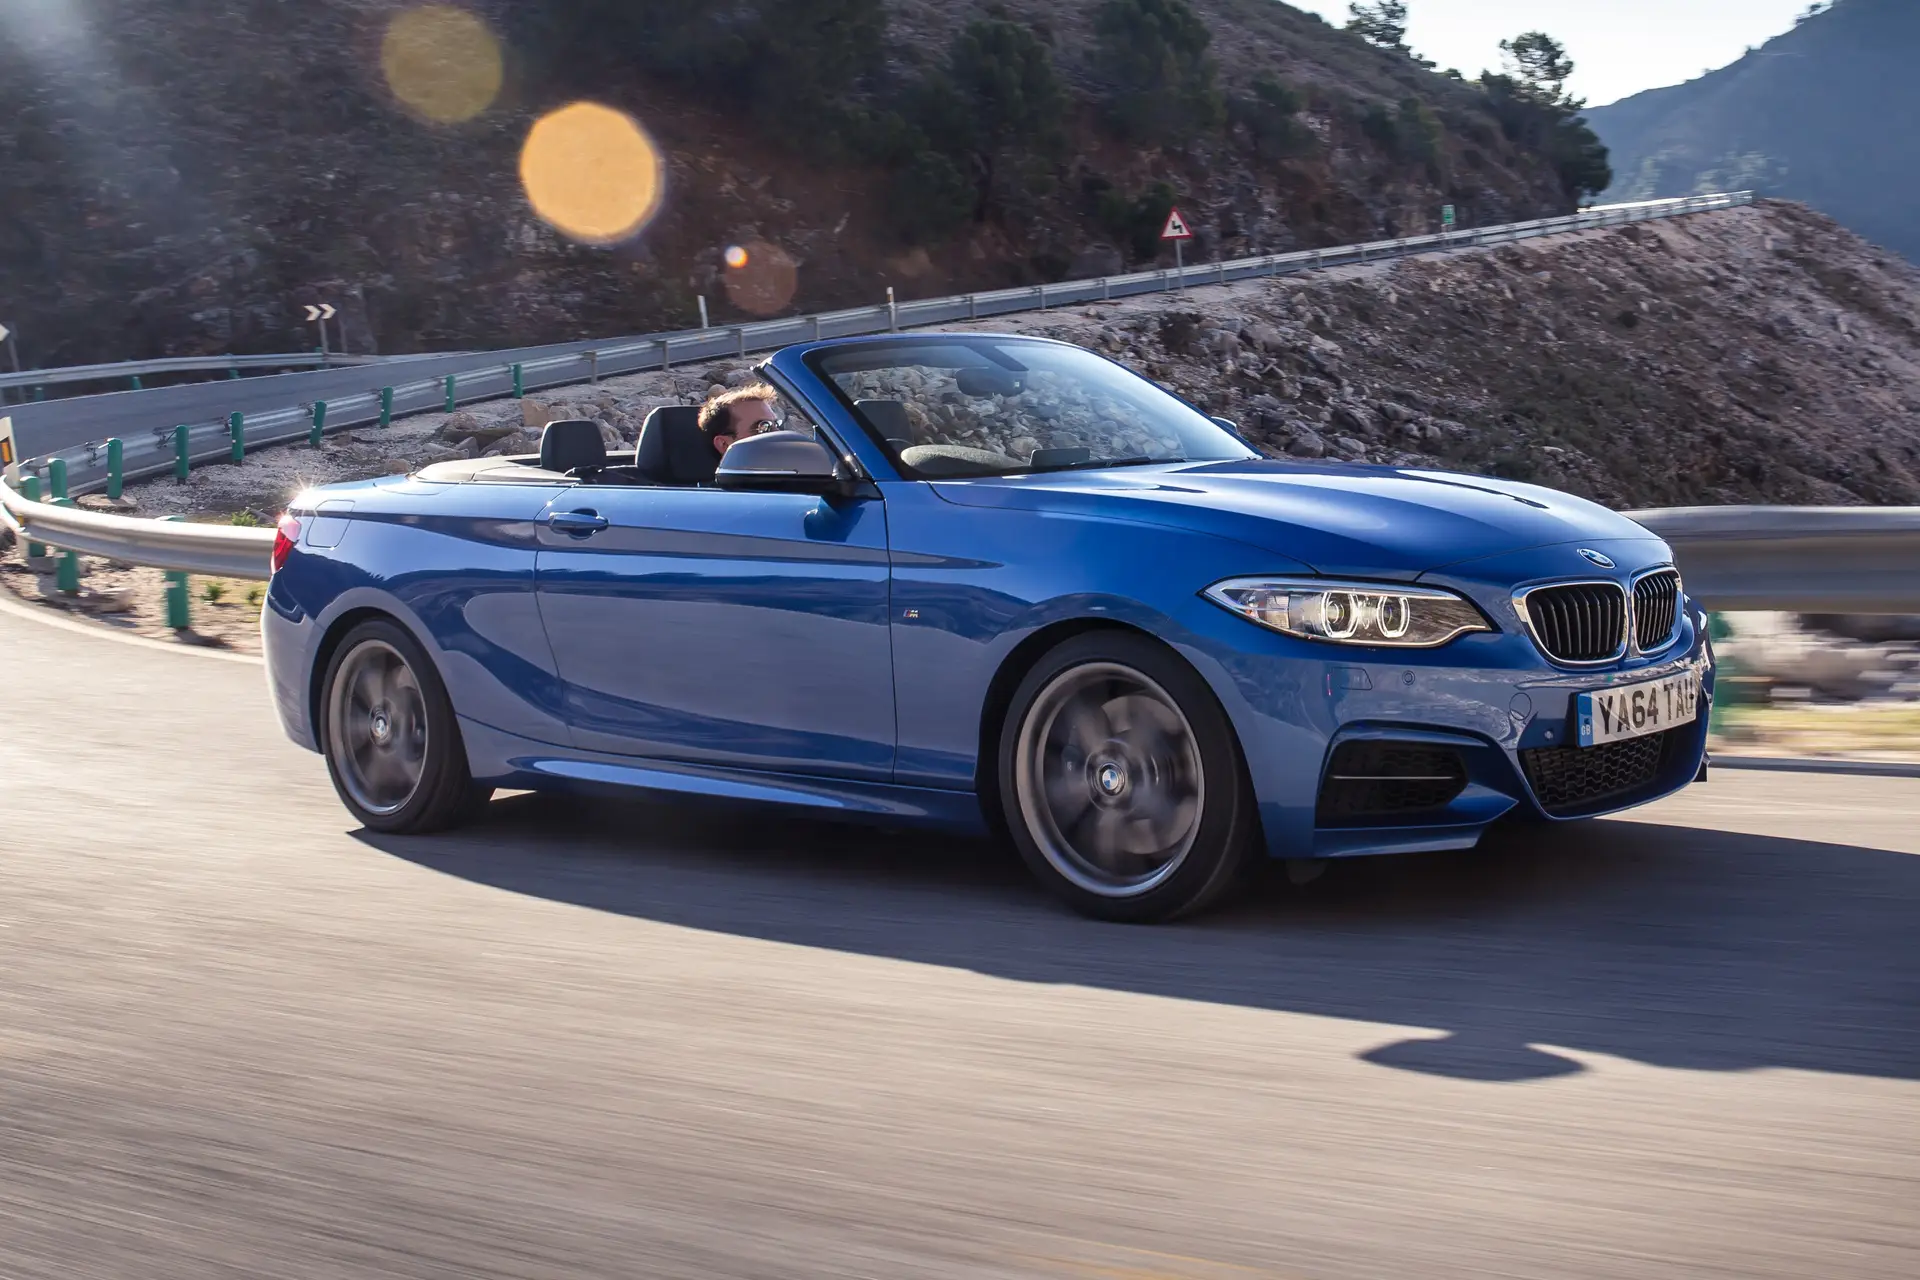 BMW 2 Series Convertible Review 2023: exterior front three quarter photo of the BMW 2 Series Convertible on the road